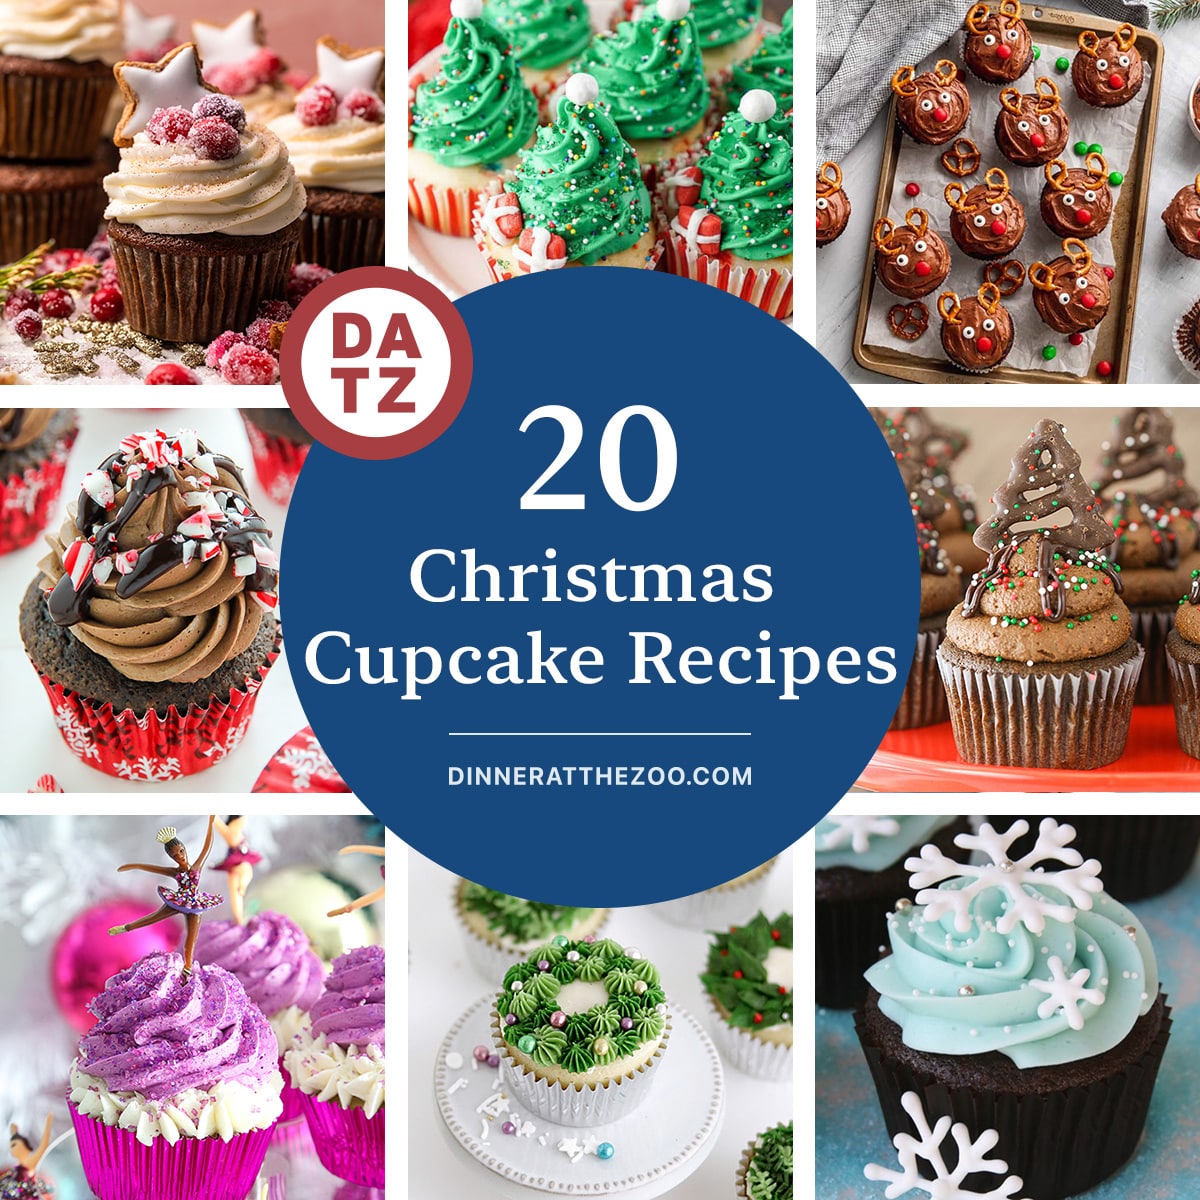 A group of images of Christmas cupcake recipes such as peppermint mocha chocolate cupcakes, Christmas tree cupcakes and gingerbread cupcakes.